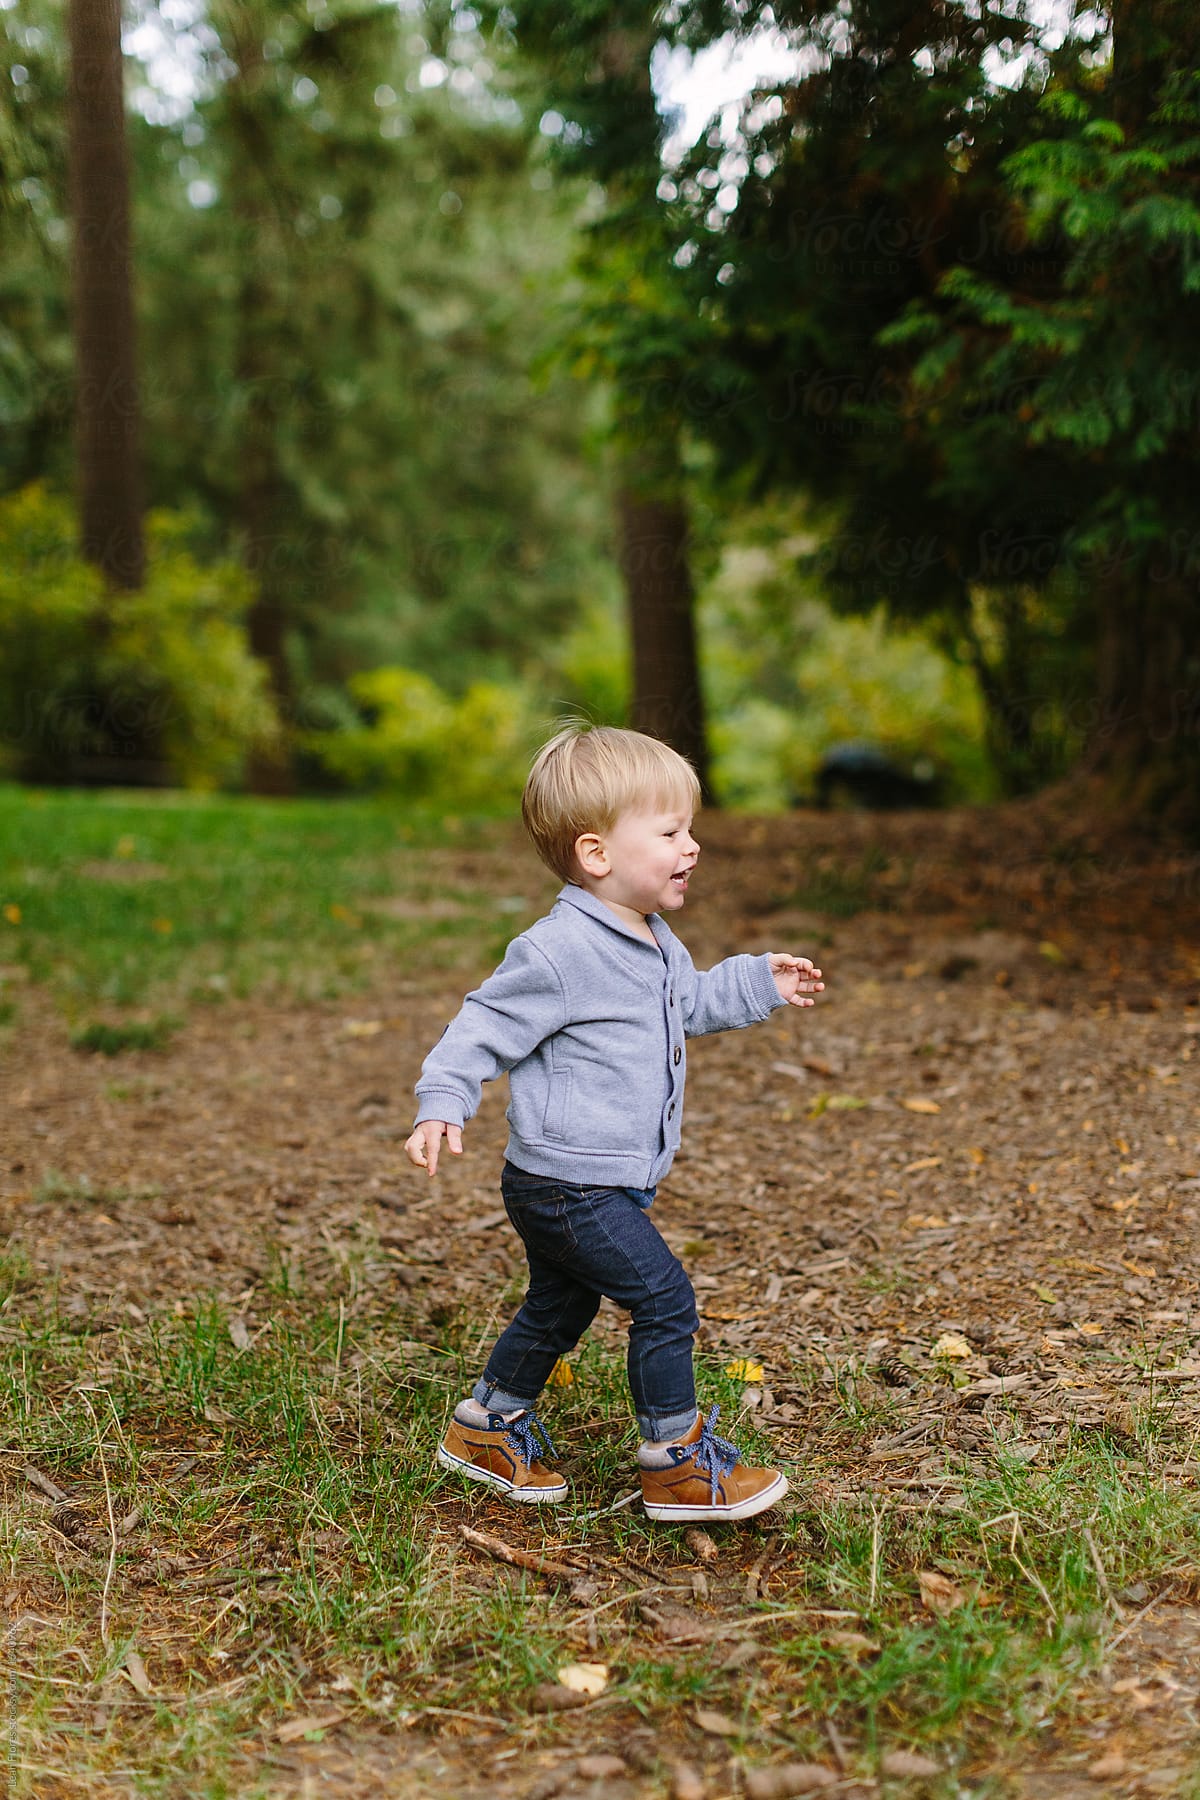 Young Boy Walking in Park by Leah Flores - Kid, Walk ...